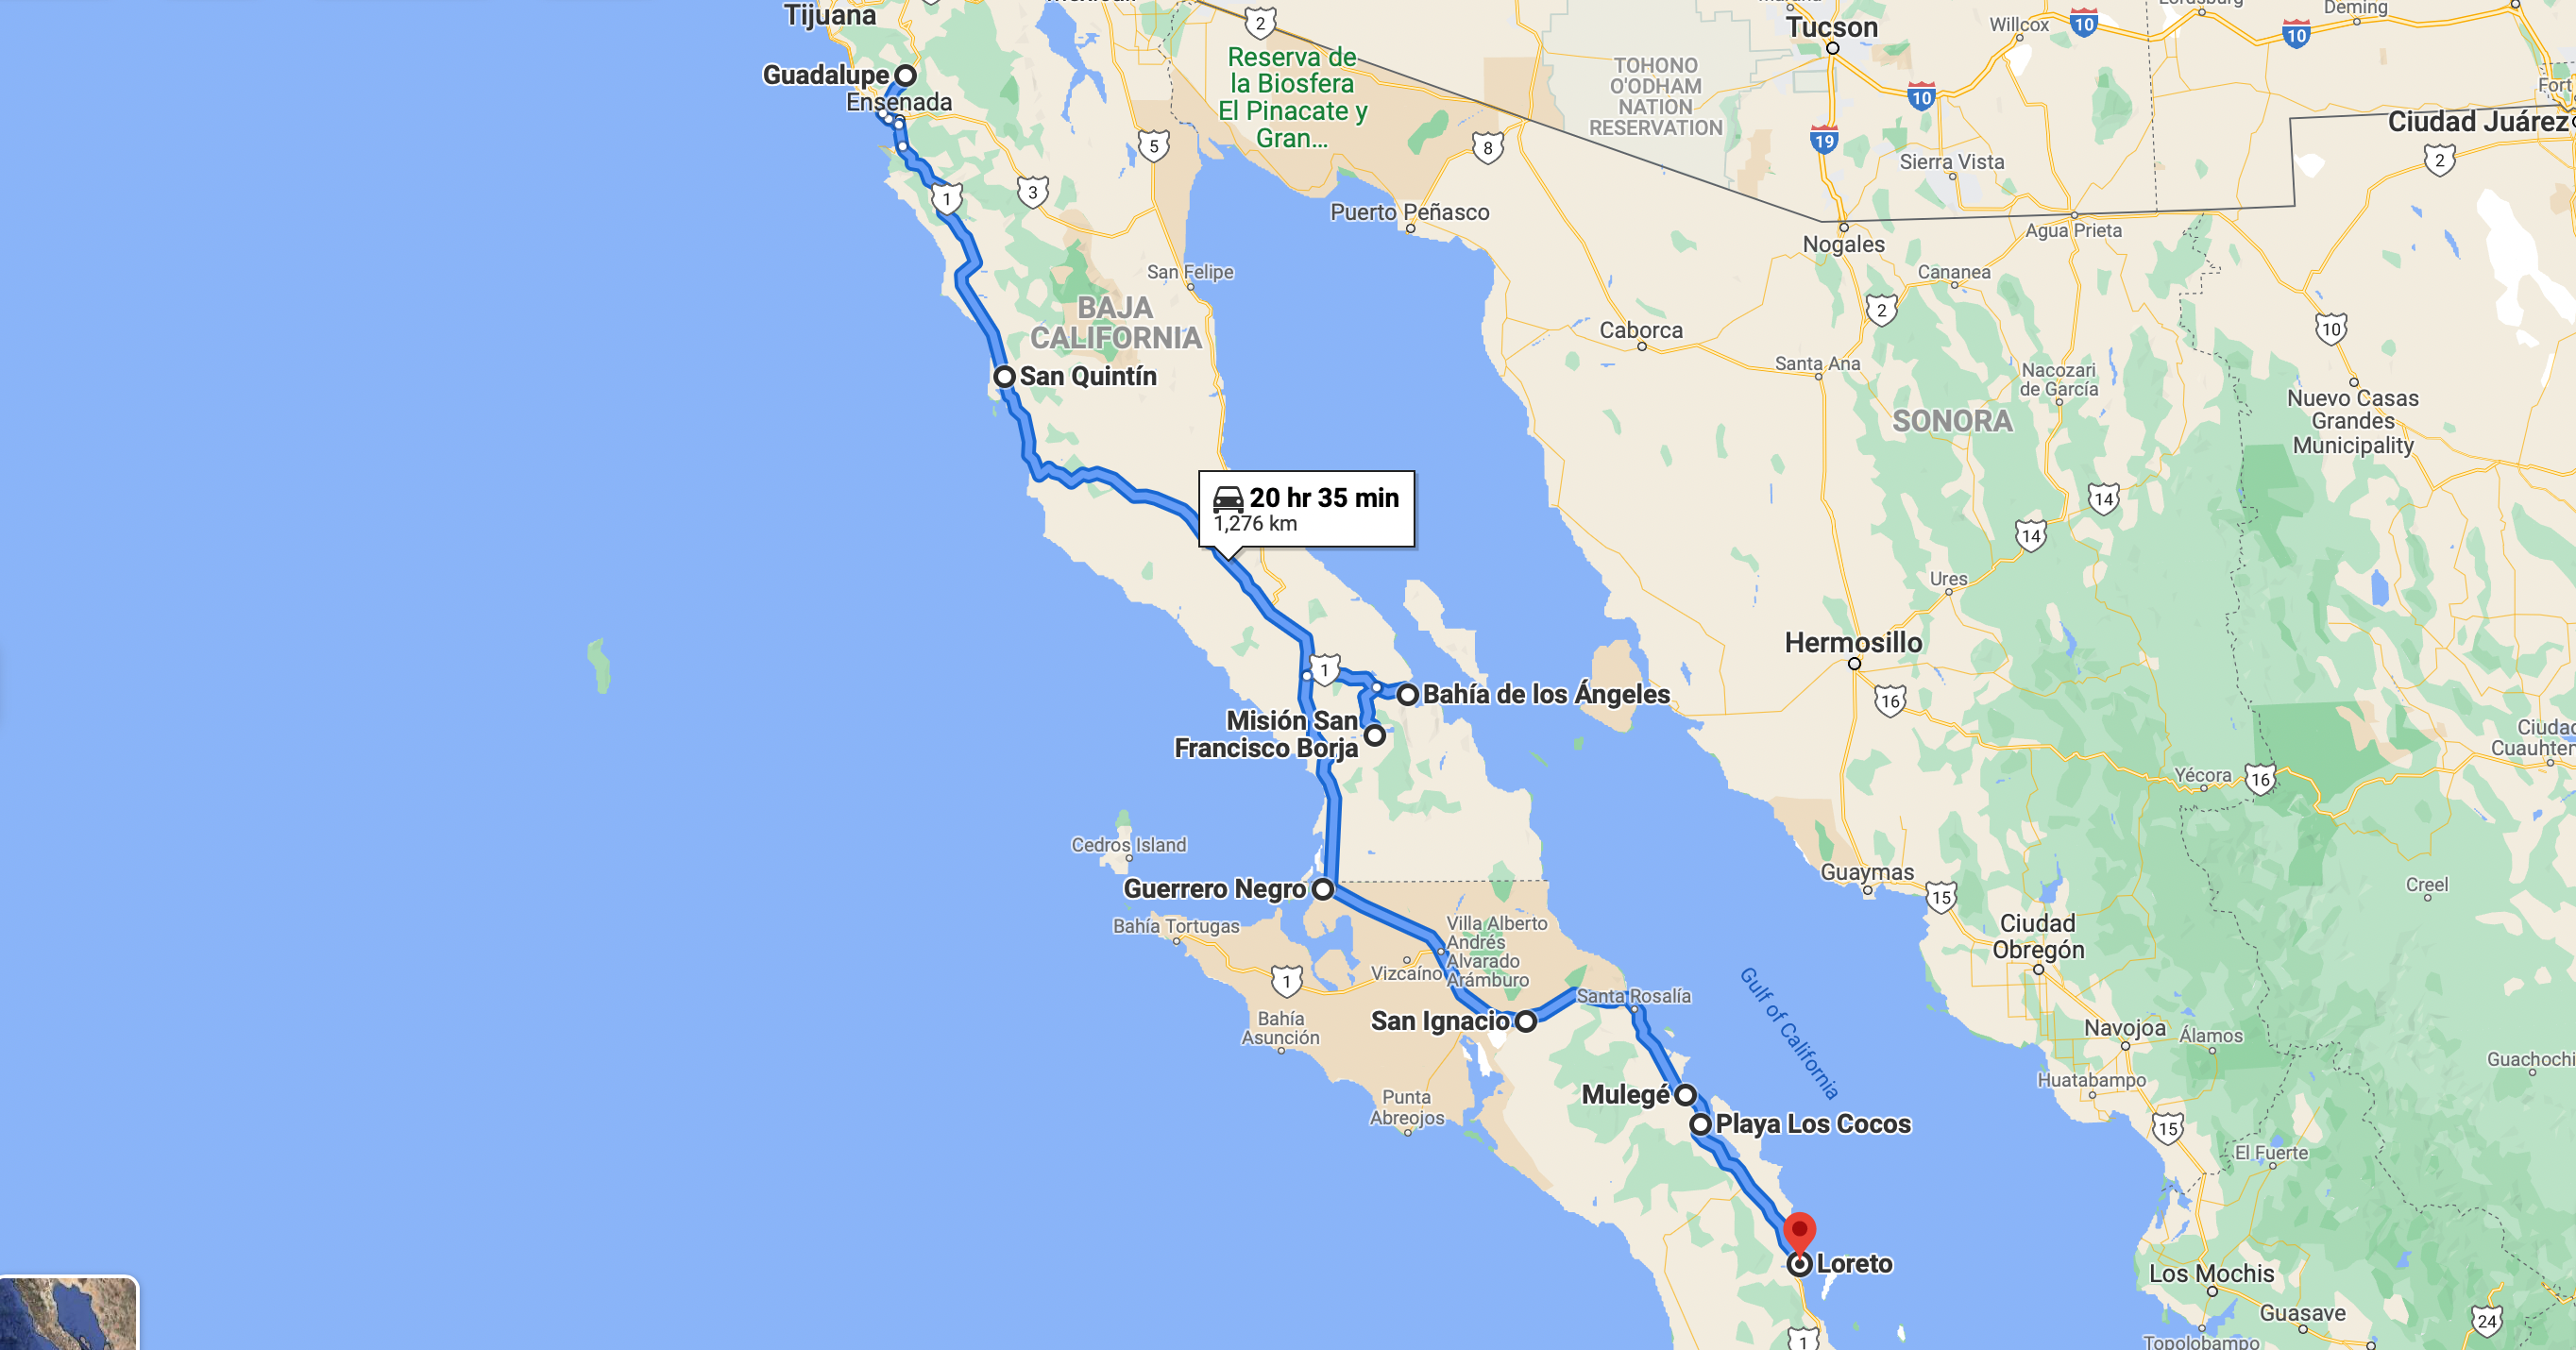 Our route for that second week